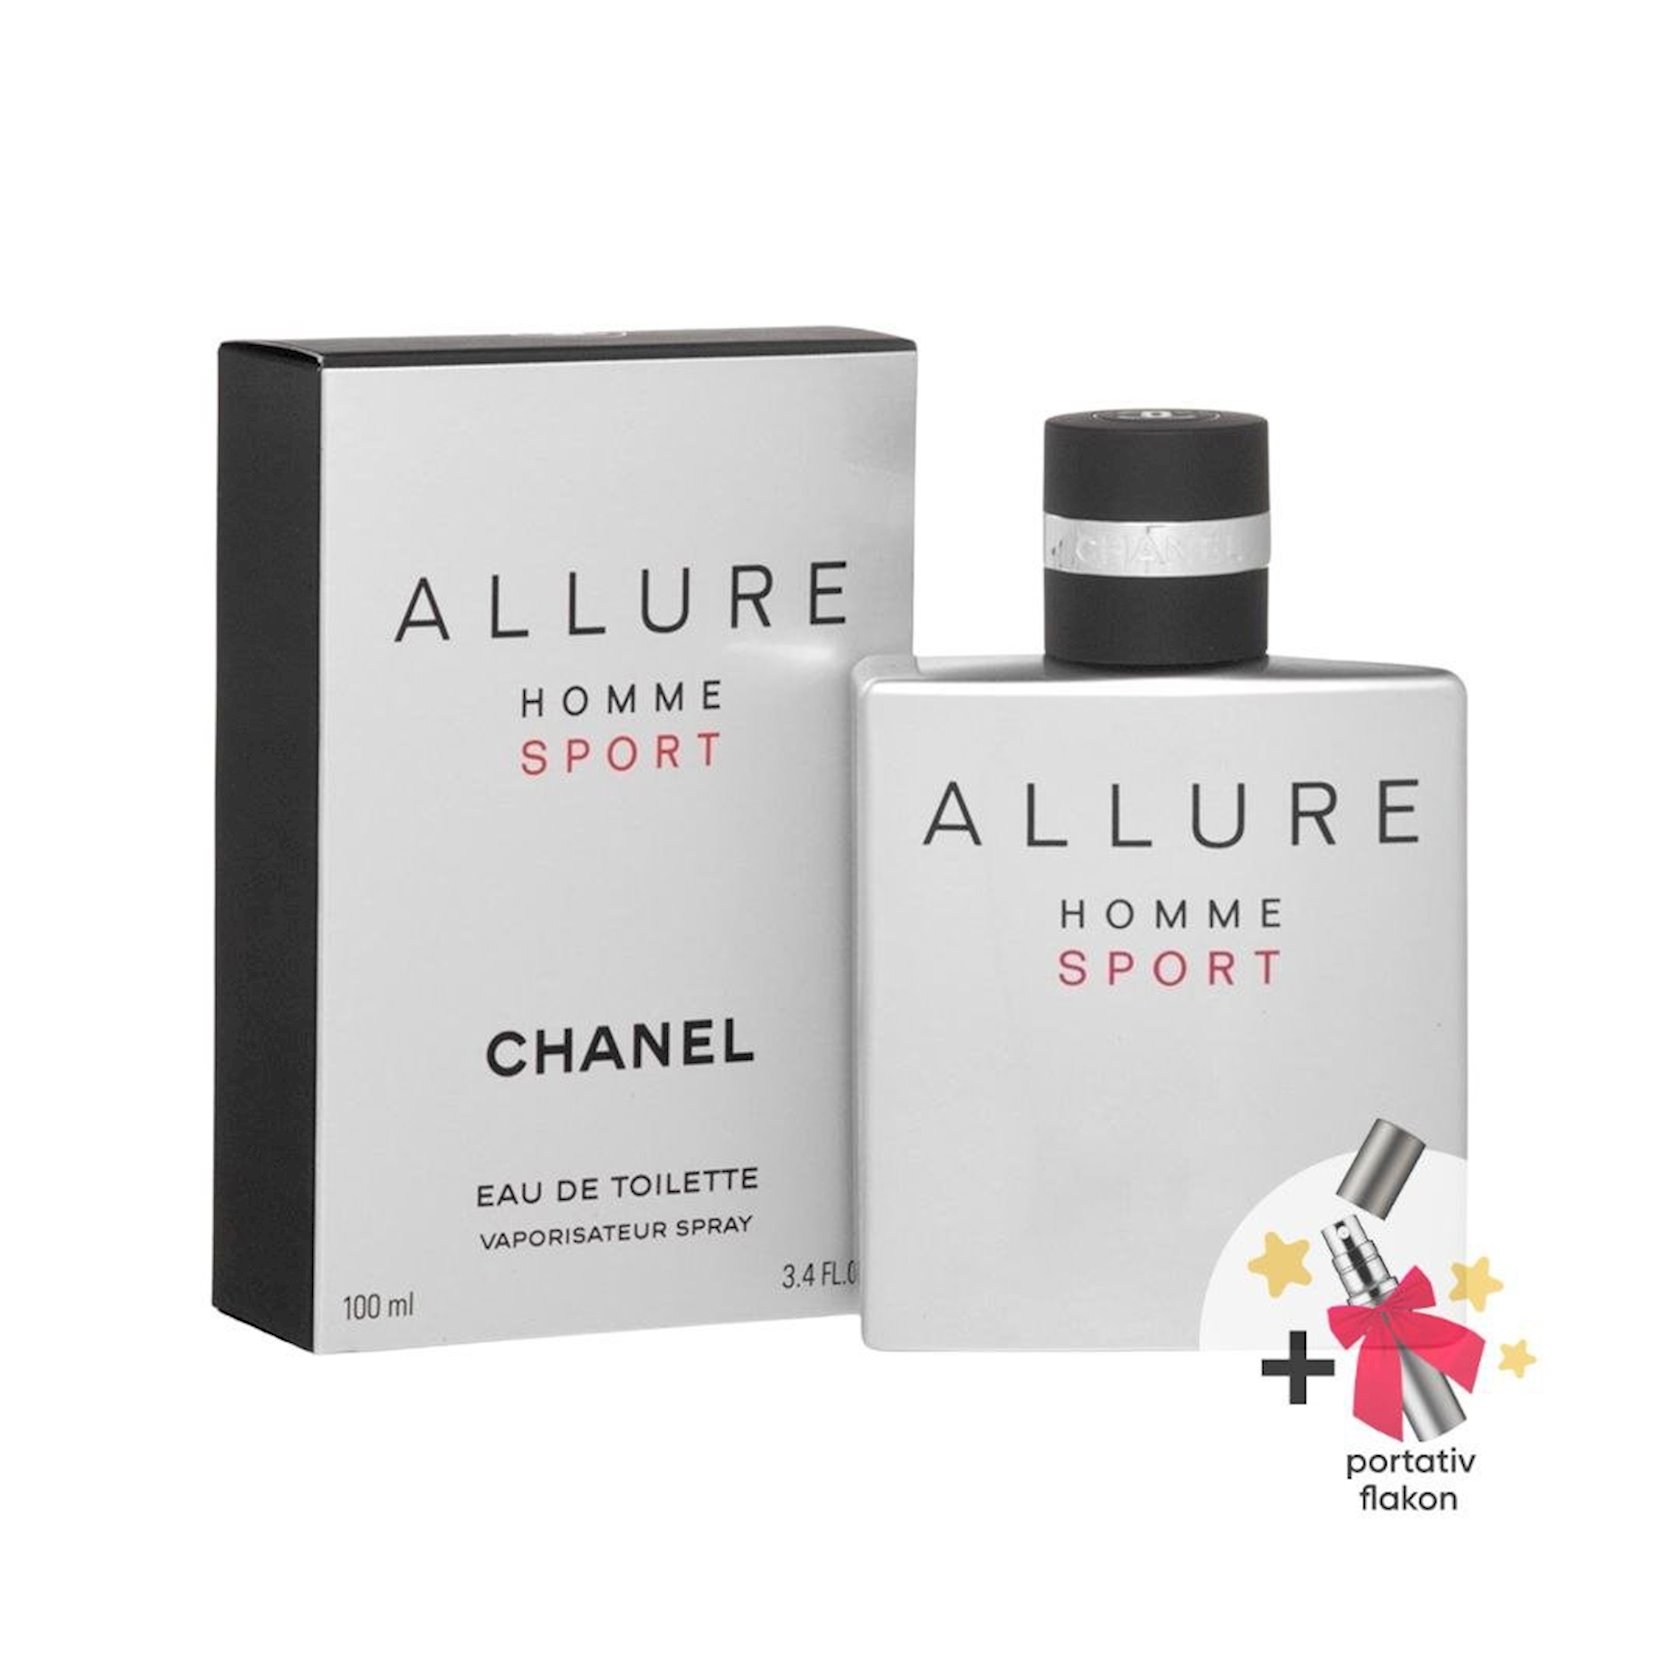 CHANEL Allure Homme Sport Eau de Cologne Spray 150 ml from CHF 171.50 at